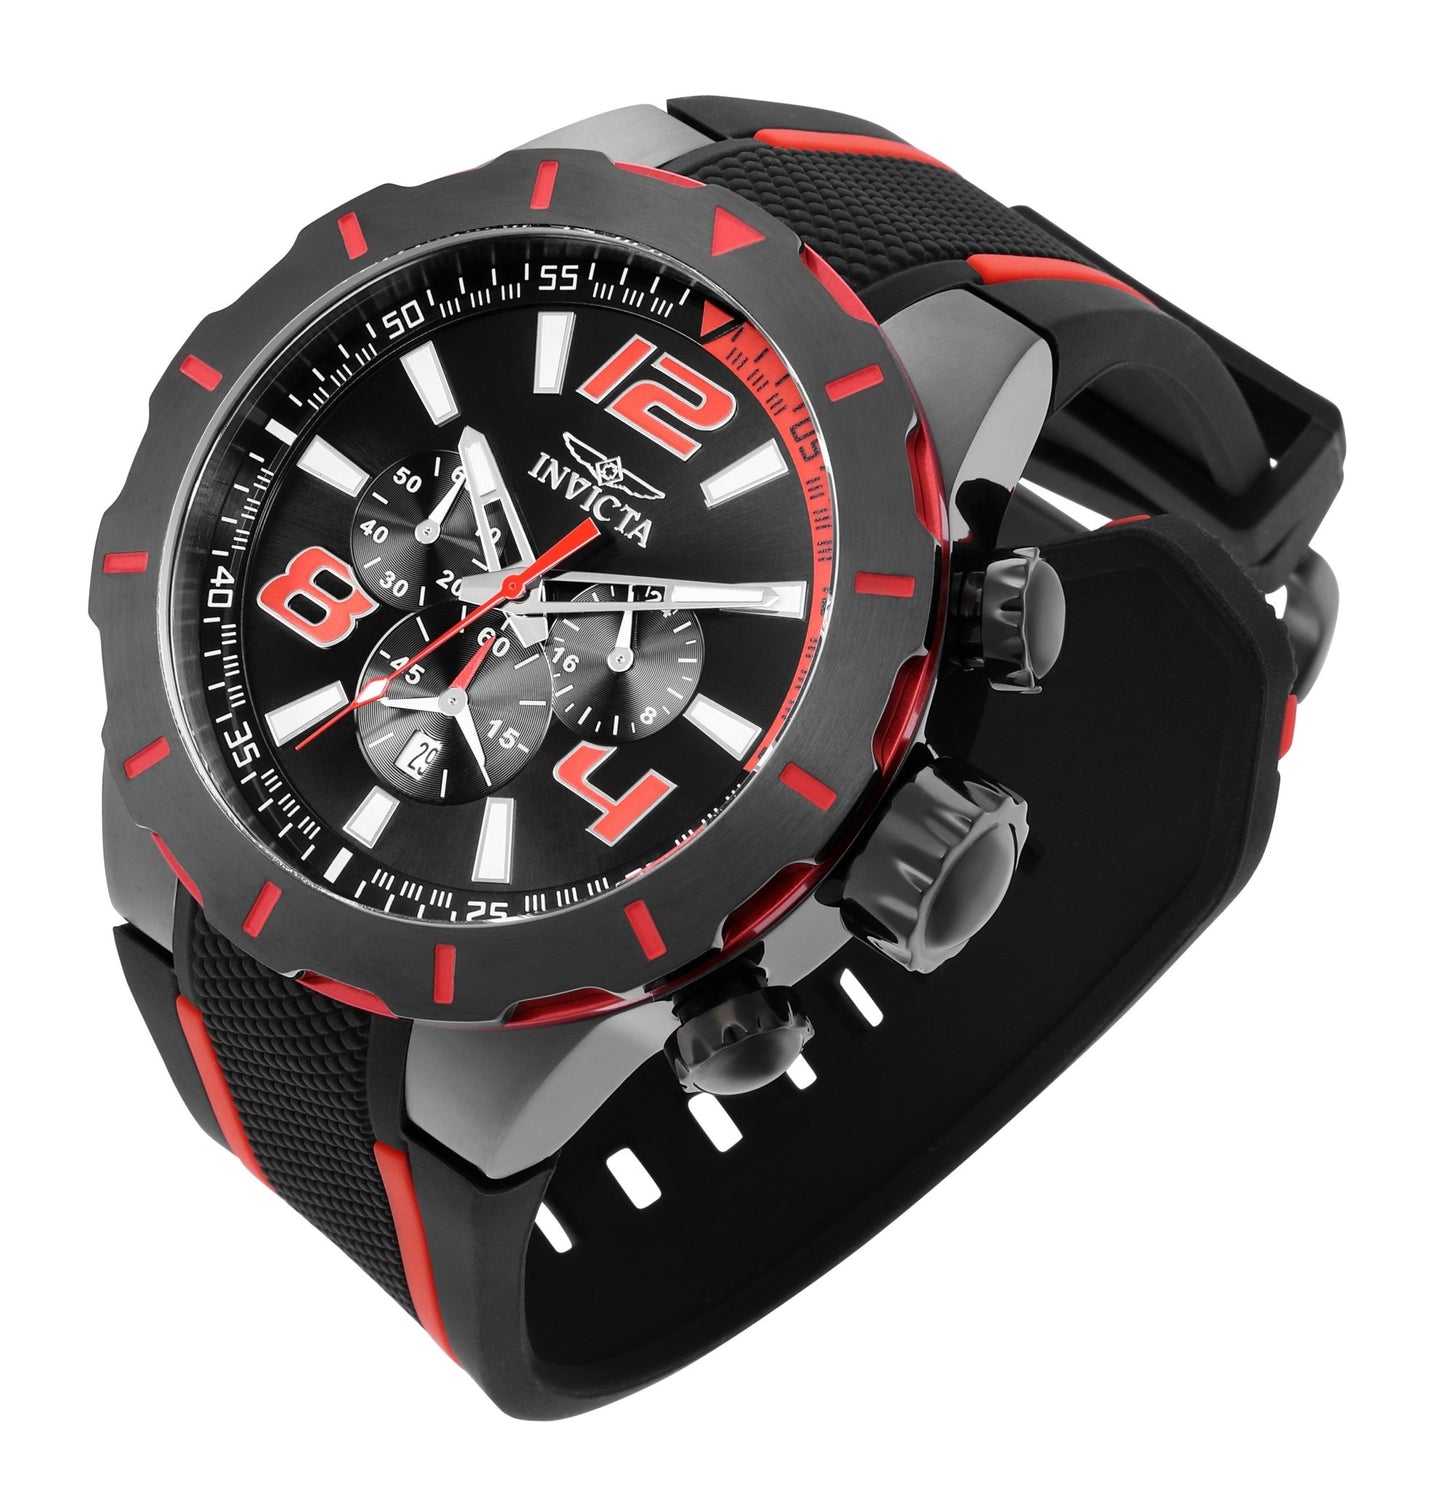 Angled view of Invicta S1 Rally 20109 showcasing the black dial and red details